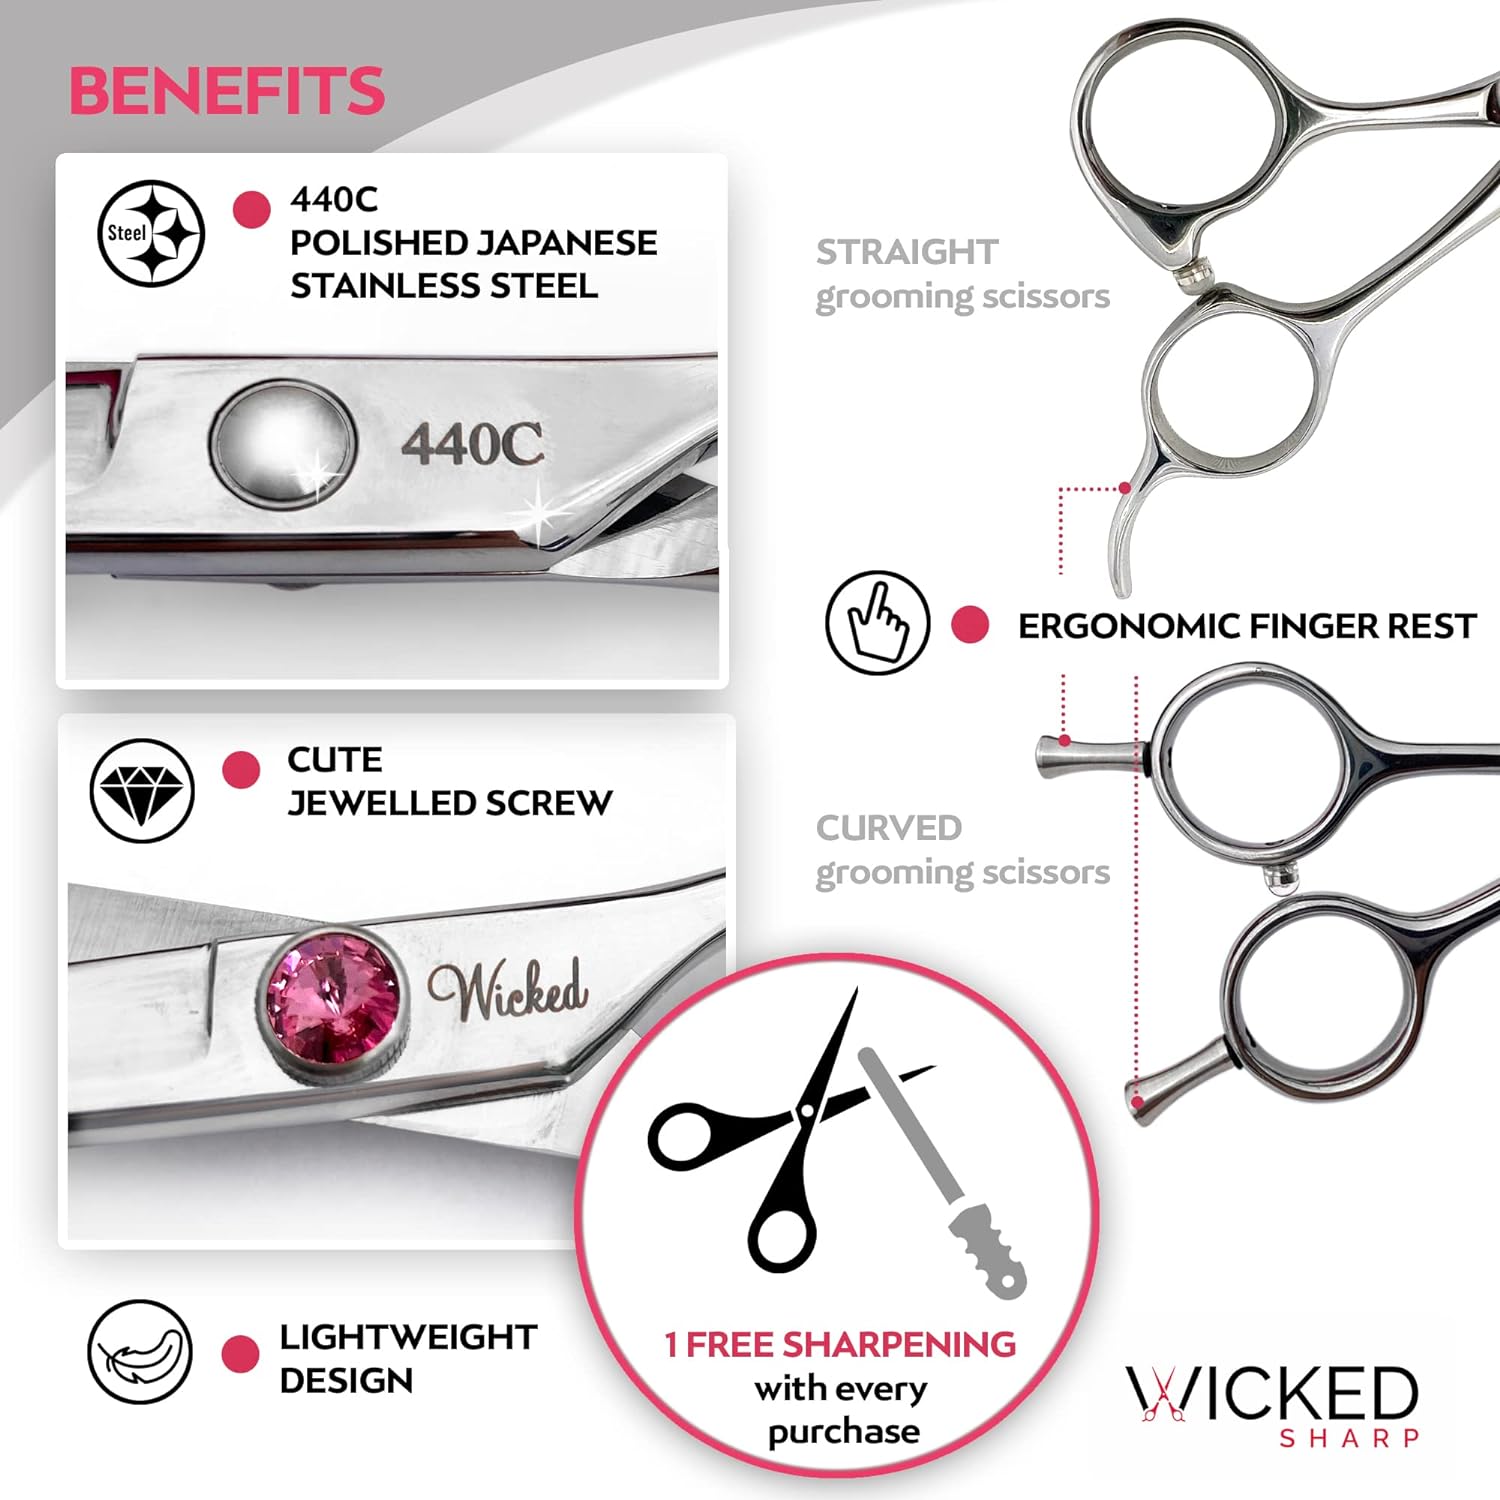 Wicked Sharp Professional Dog Scissors: A Remarkable Grooming Kit That Redefines Precision and Comfort